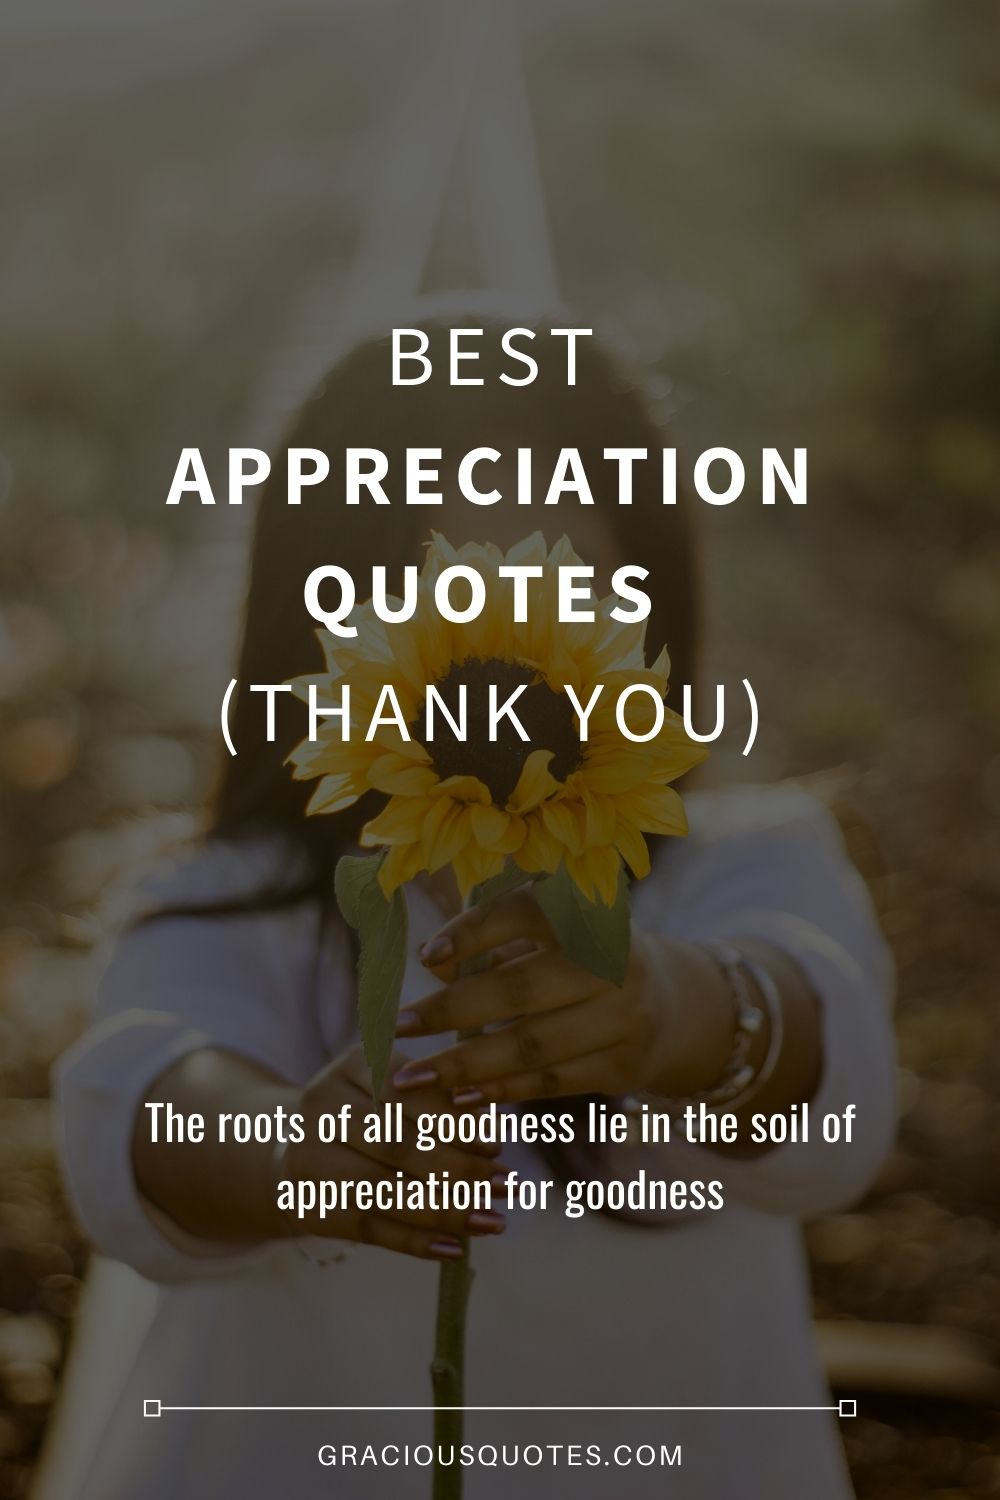 Top 12 Best Appreciation Quotes THANK YOU